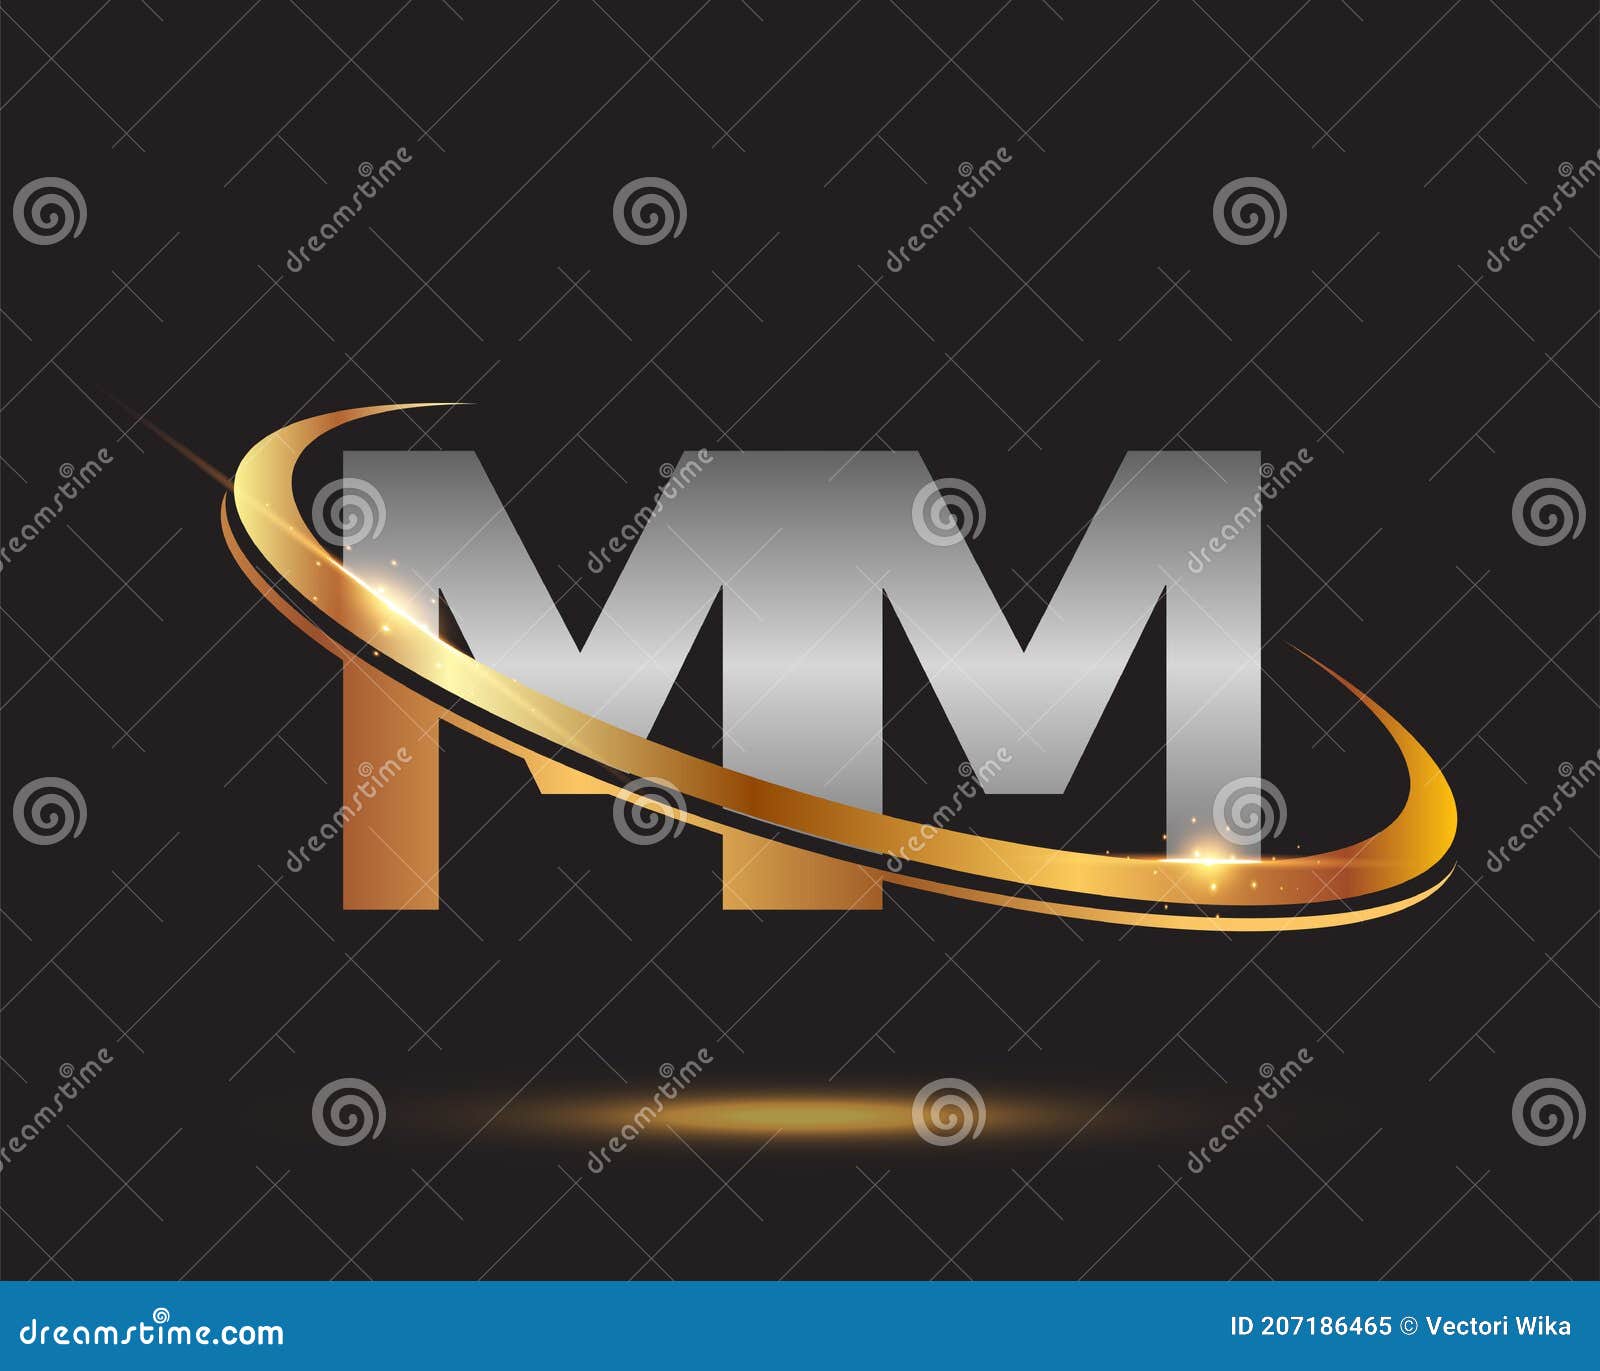 initial letter mm